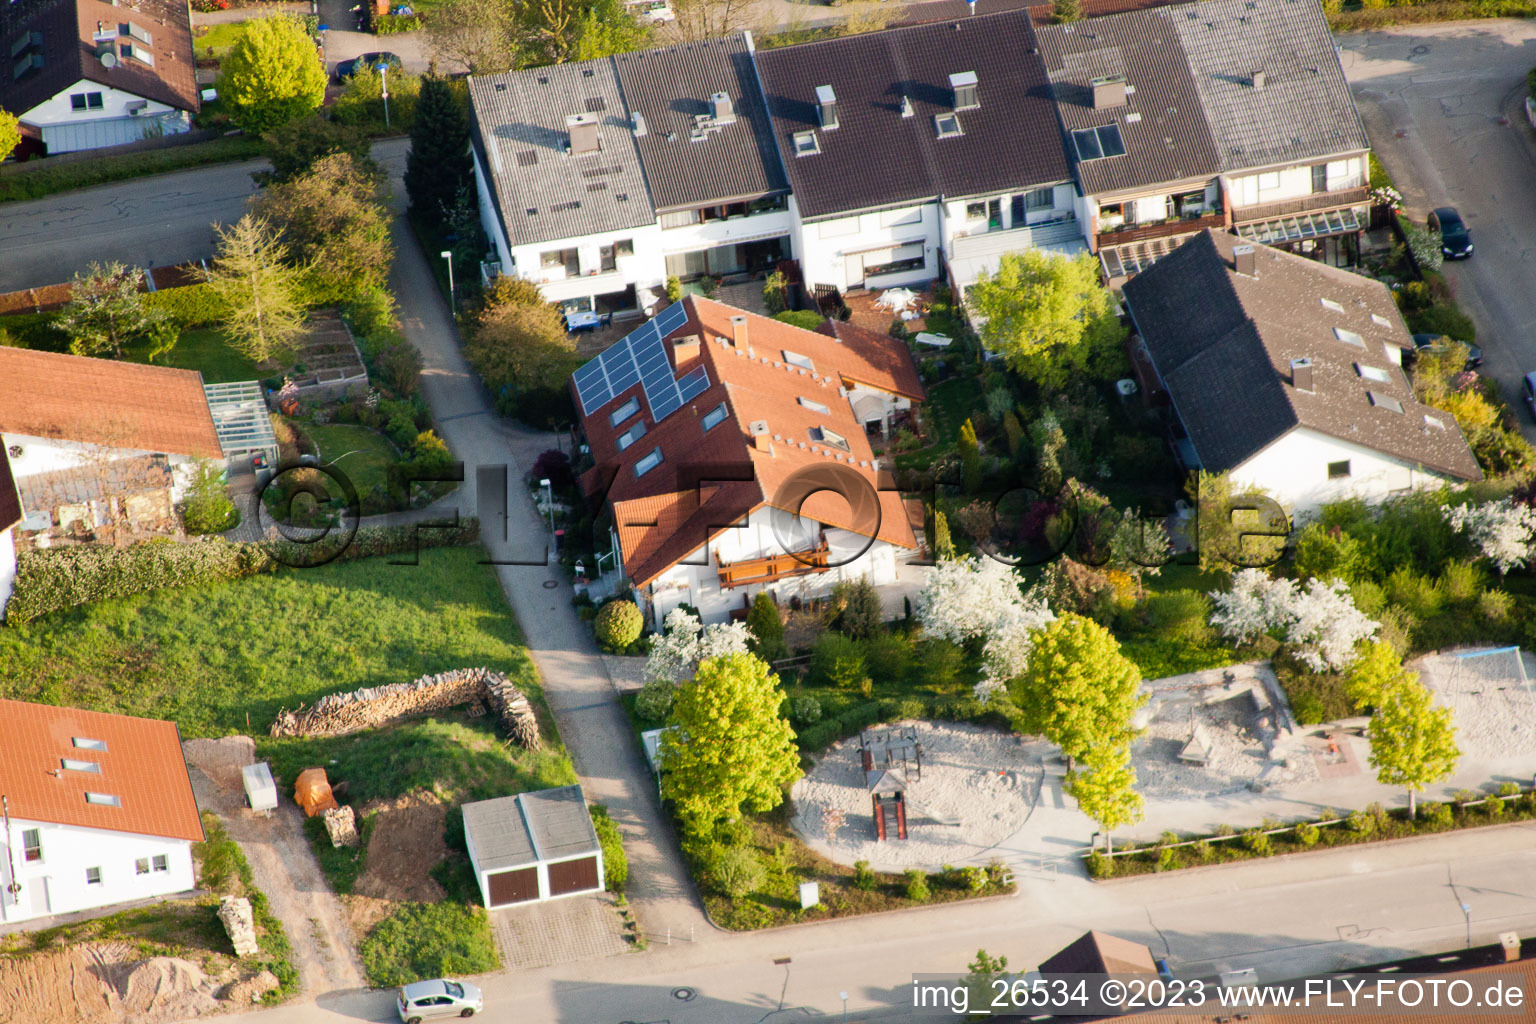 Drone recording of District Stupferich in Karlsruhe in the state Baden-Wuerttemberg, Germany